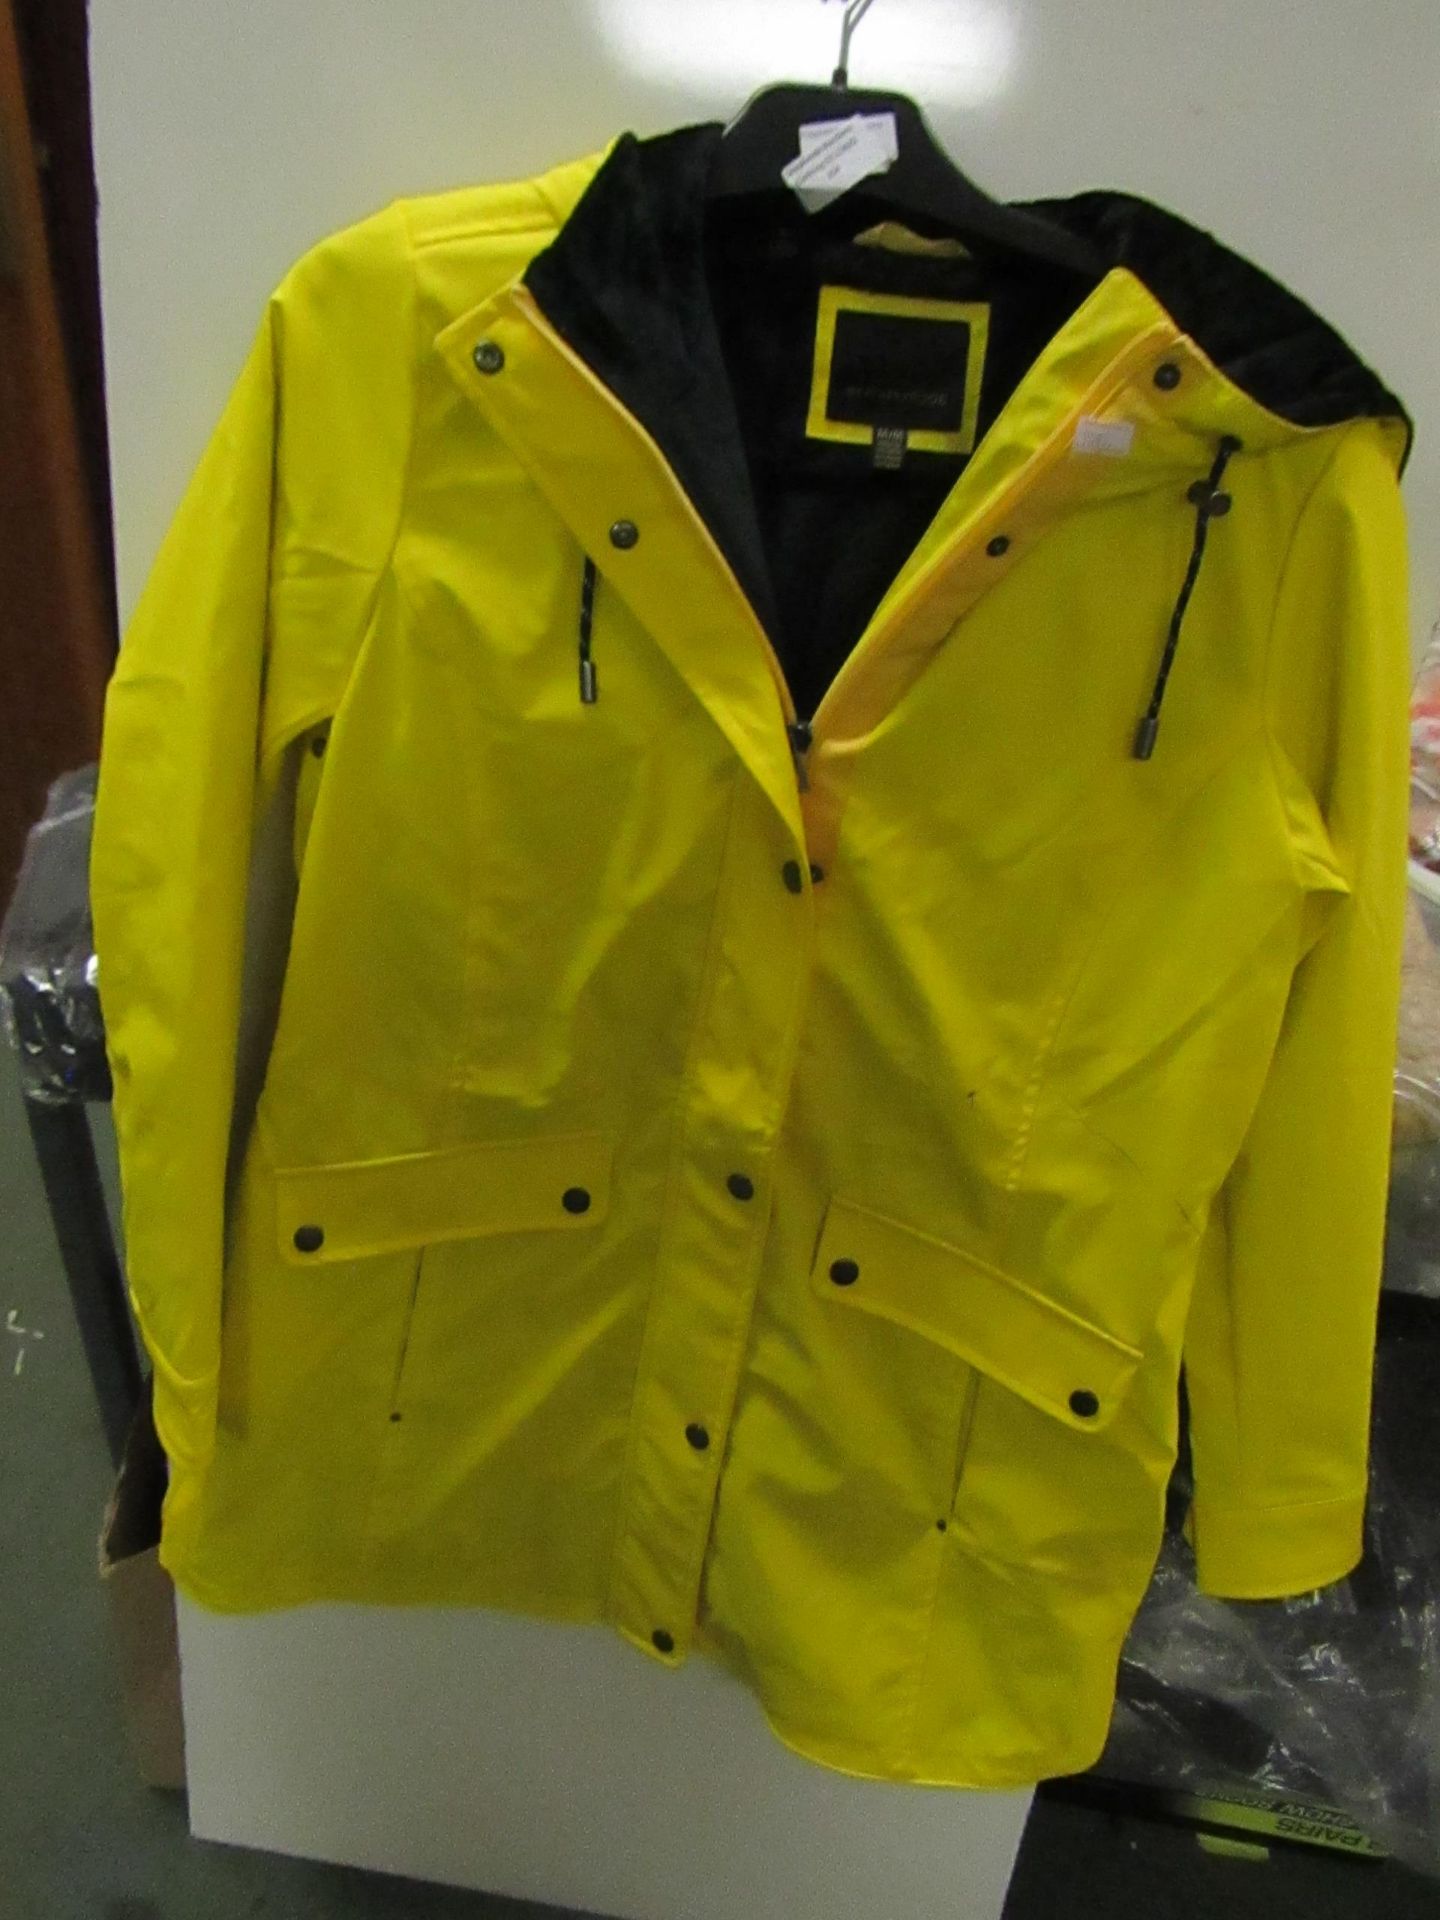 Water Resistant Jacket Modern Fit Light Padding For Warmth Yellow ( Has Got Biro Marks On it )